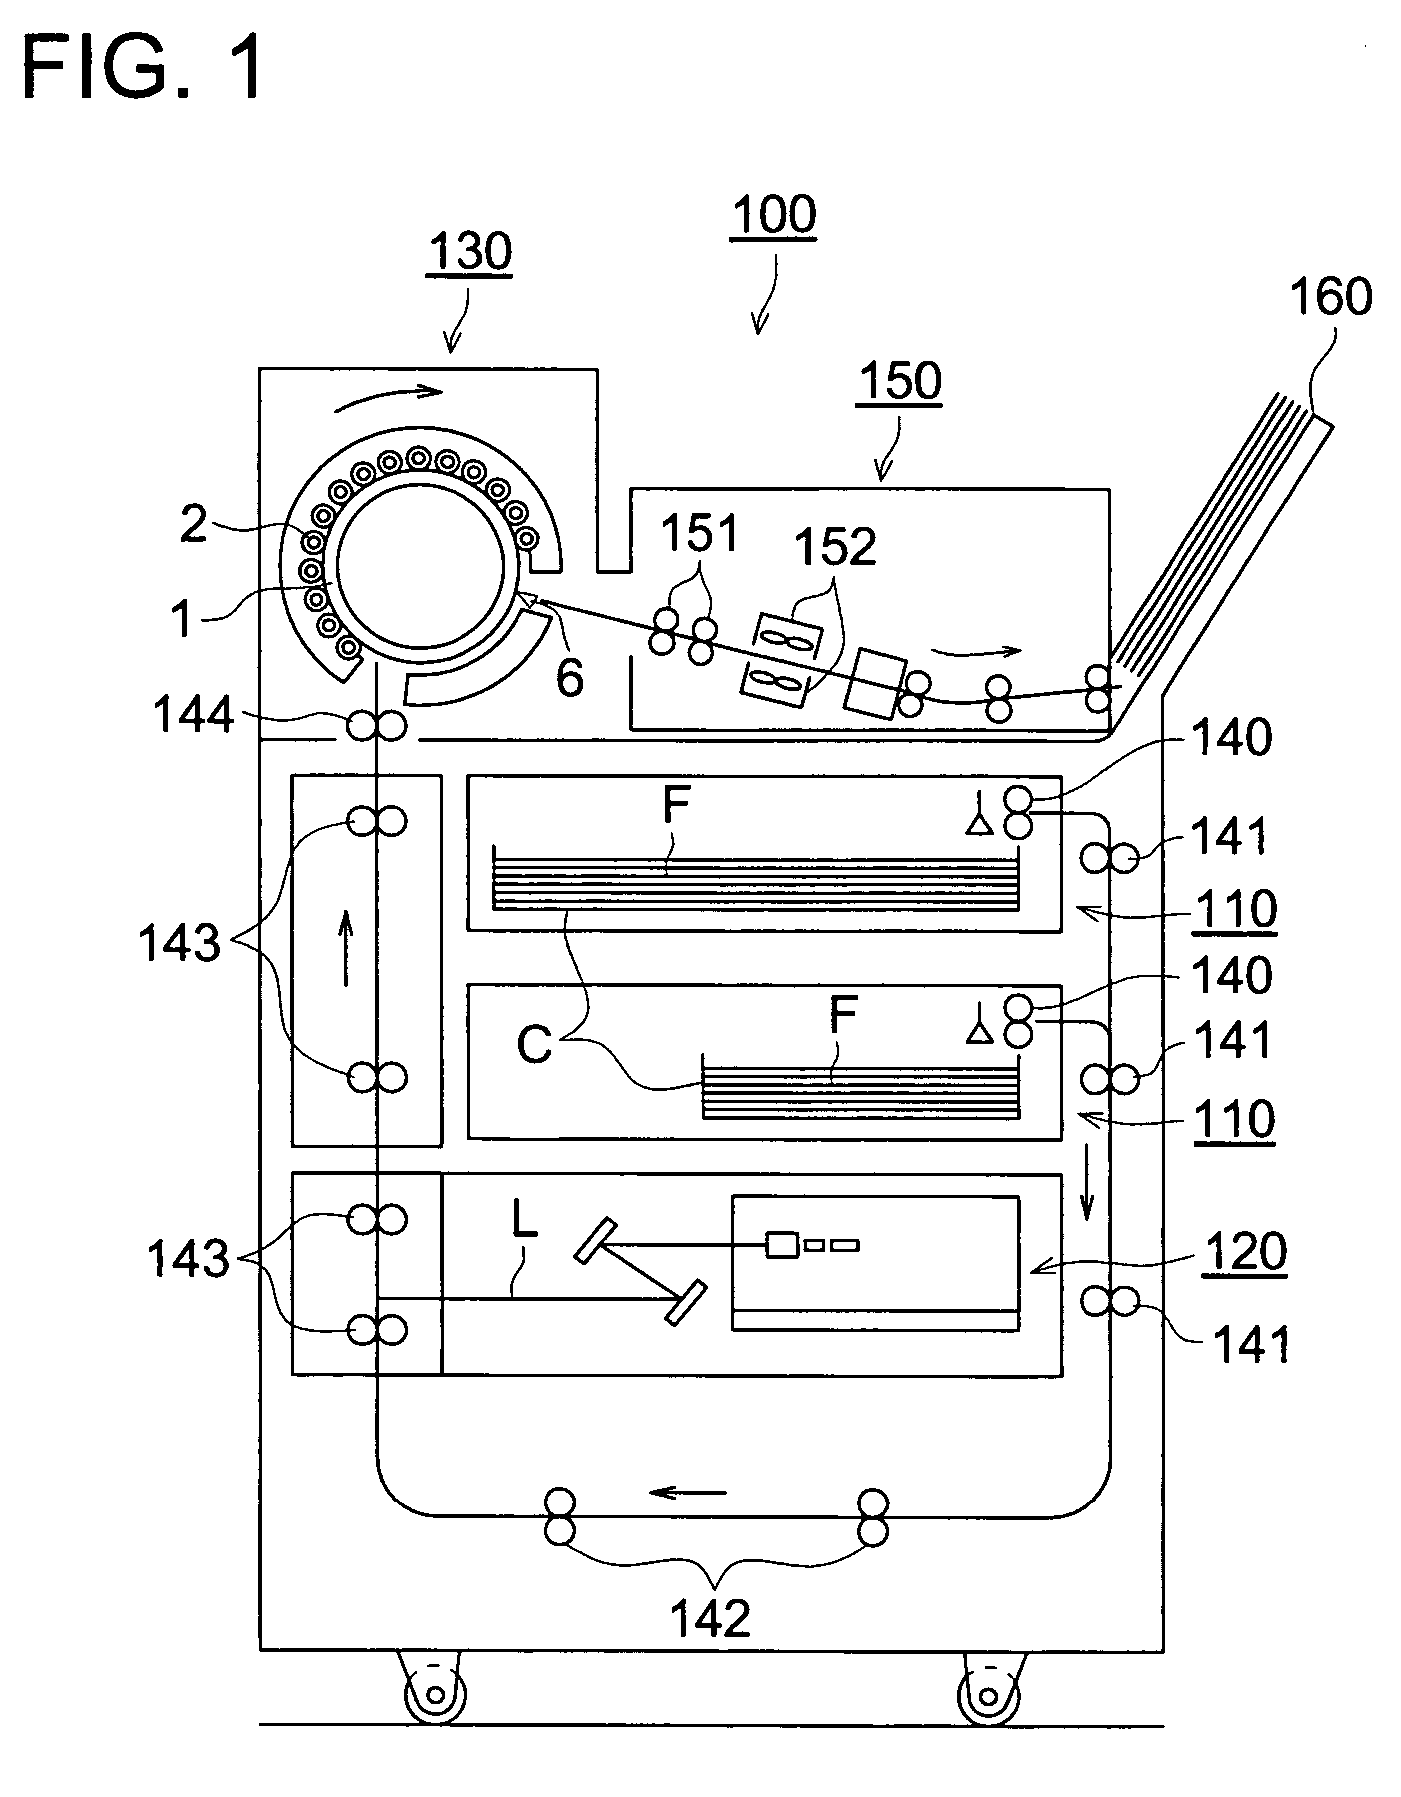 Silver salt photothermographic dry imaging material and production method of the same